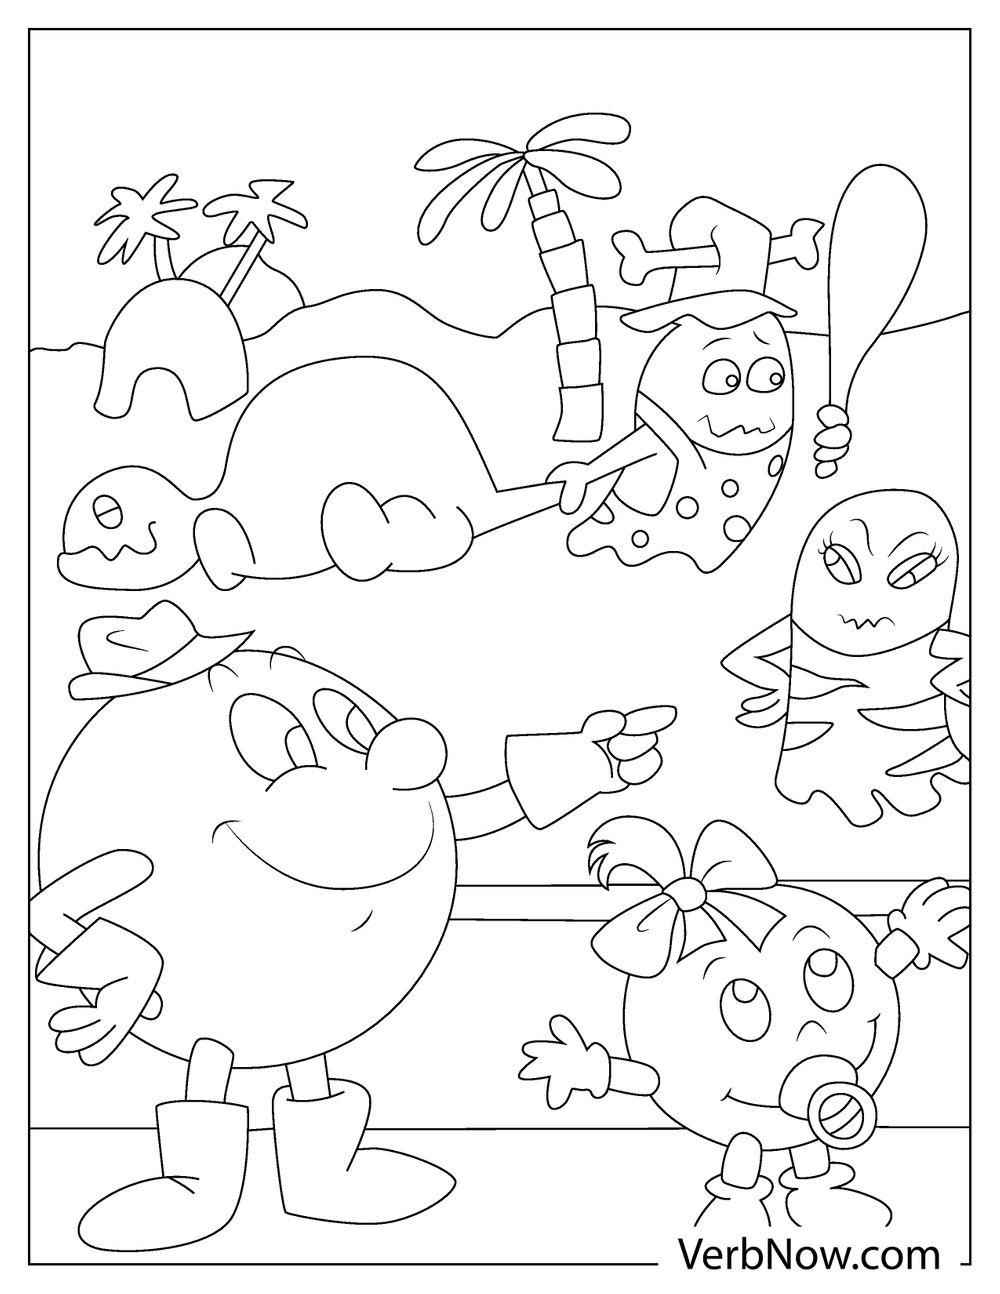 Free PACMAN Coloring Pages & Book for Download (Printable PDF) - VerbNow